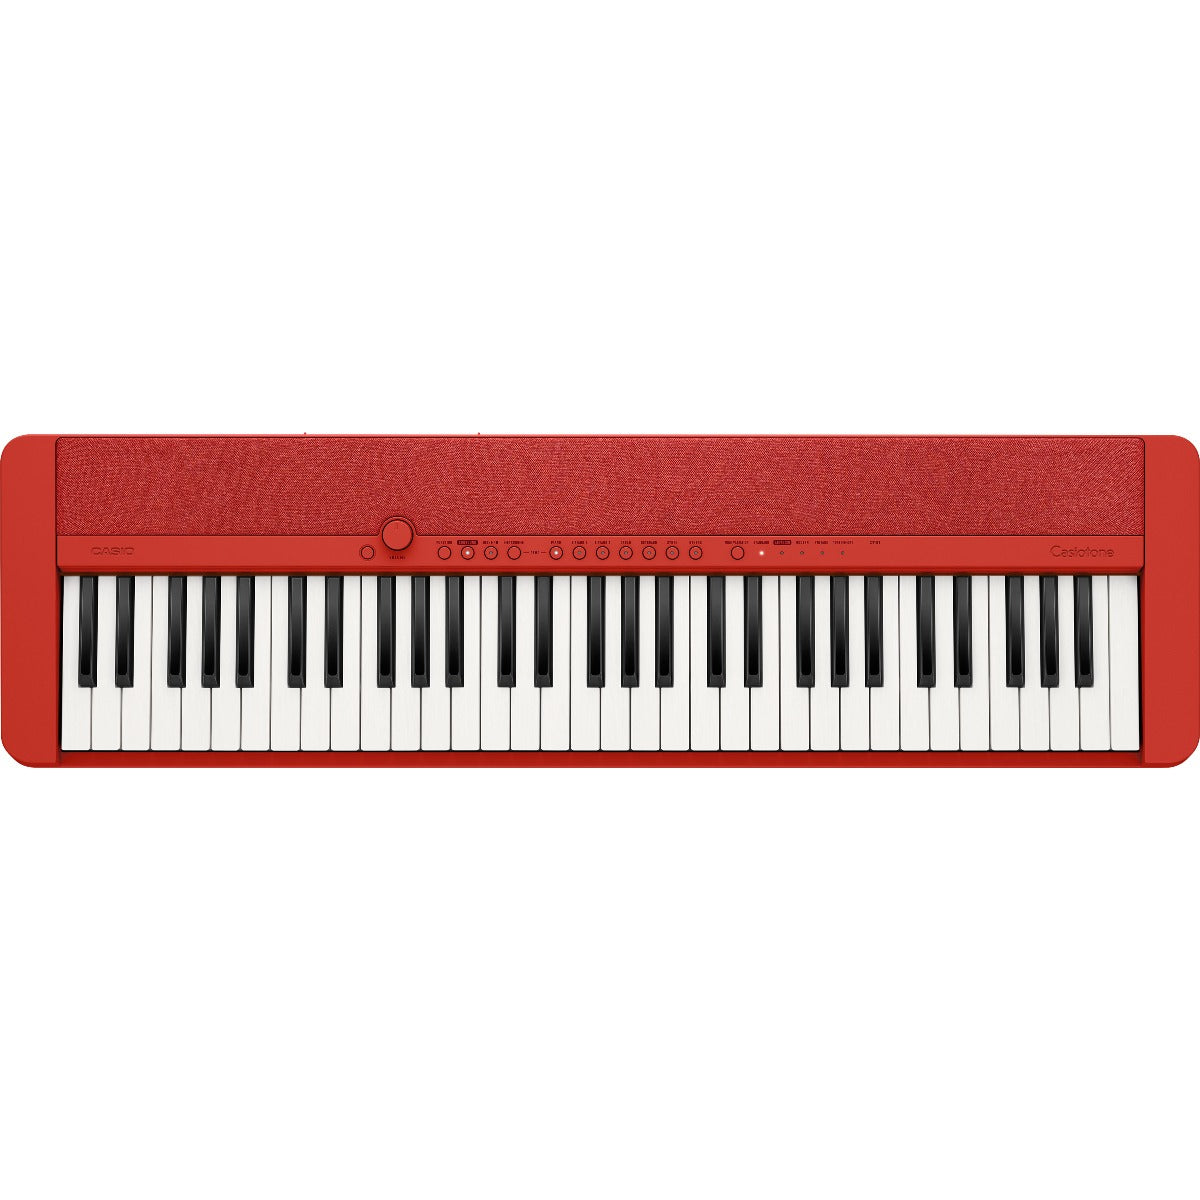 Top view of Casio Casiotone CT-S1 Portable Keyboard - Red